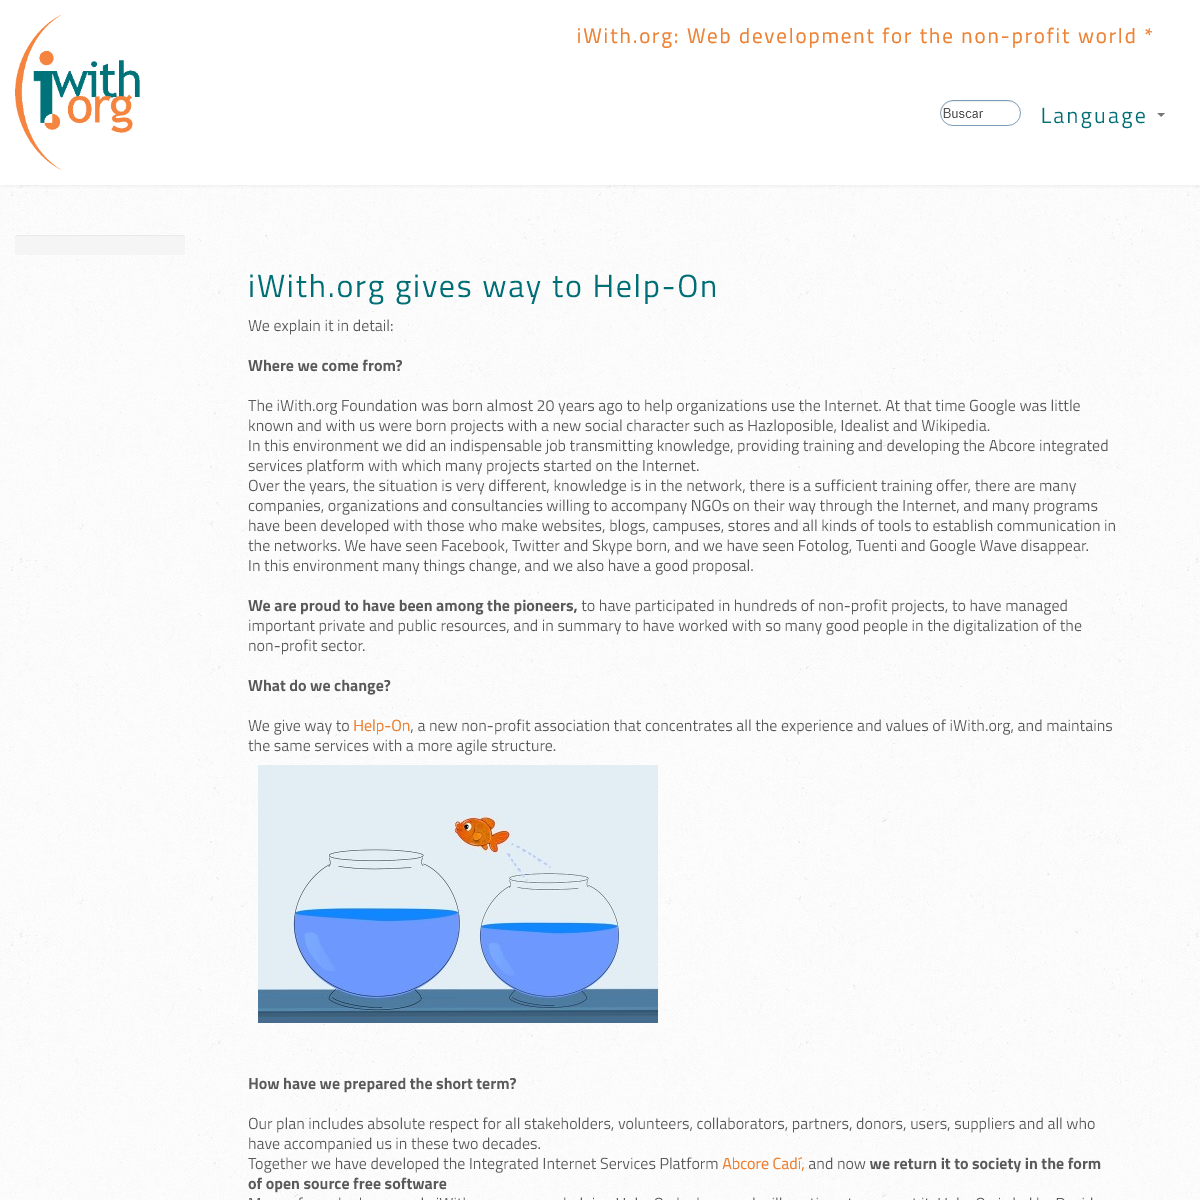 A complete backup of iwith.org